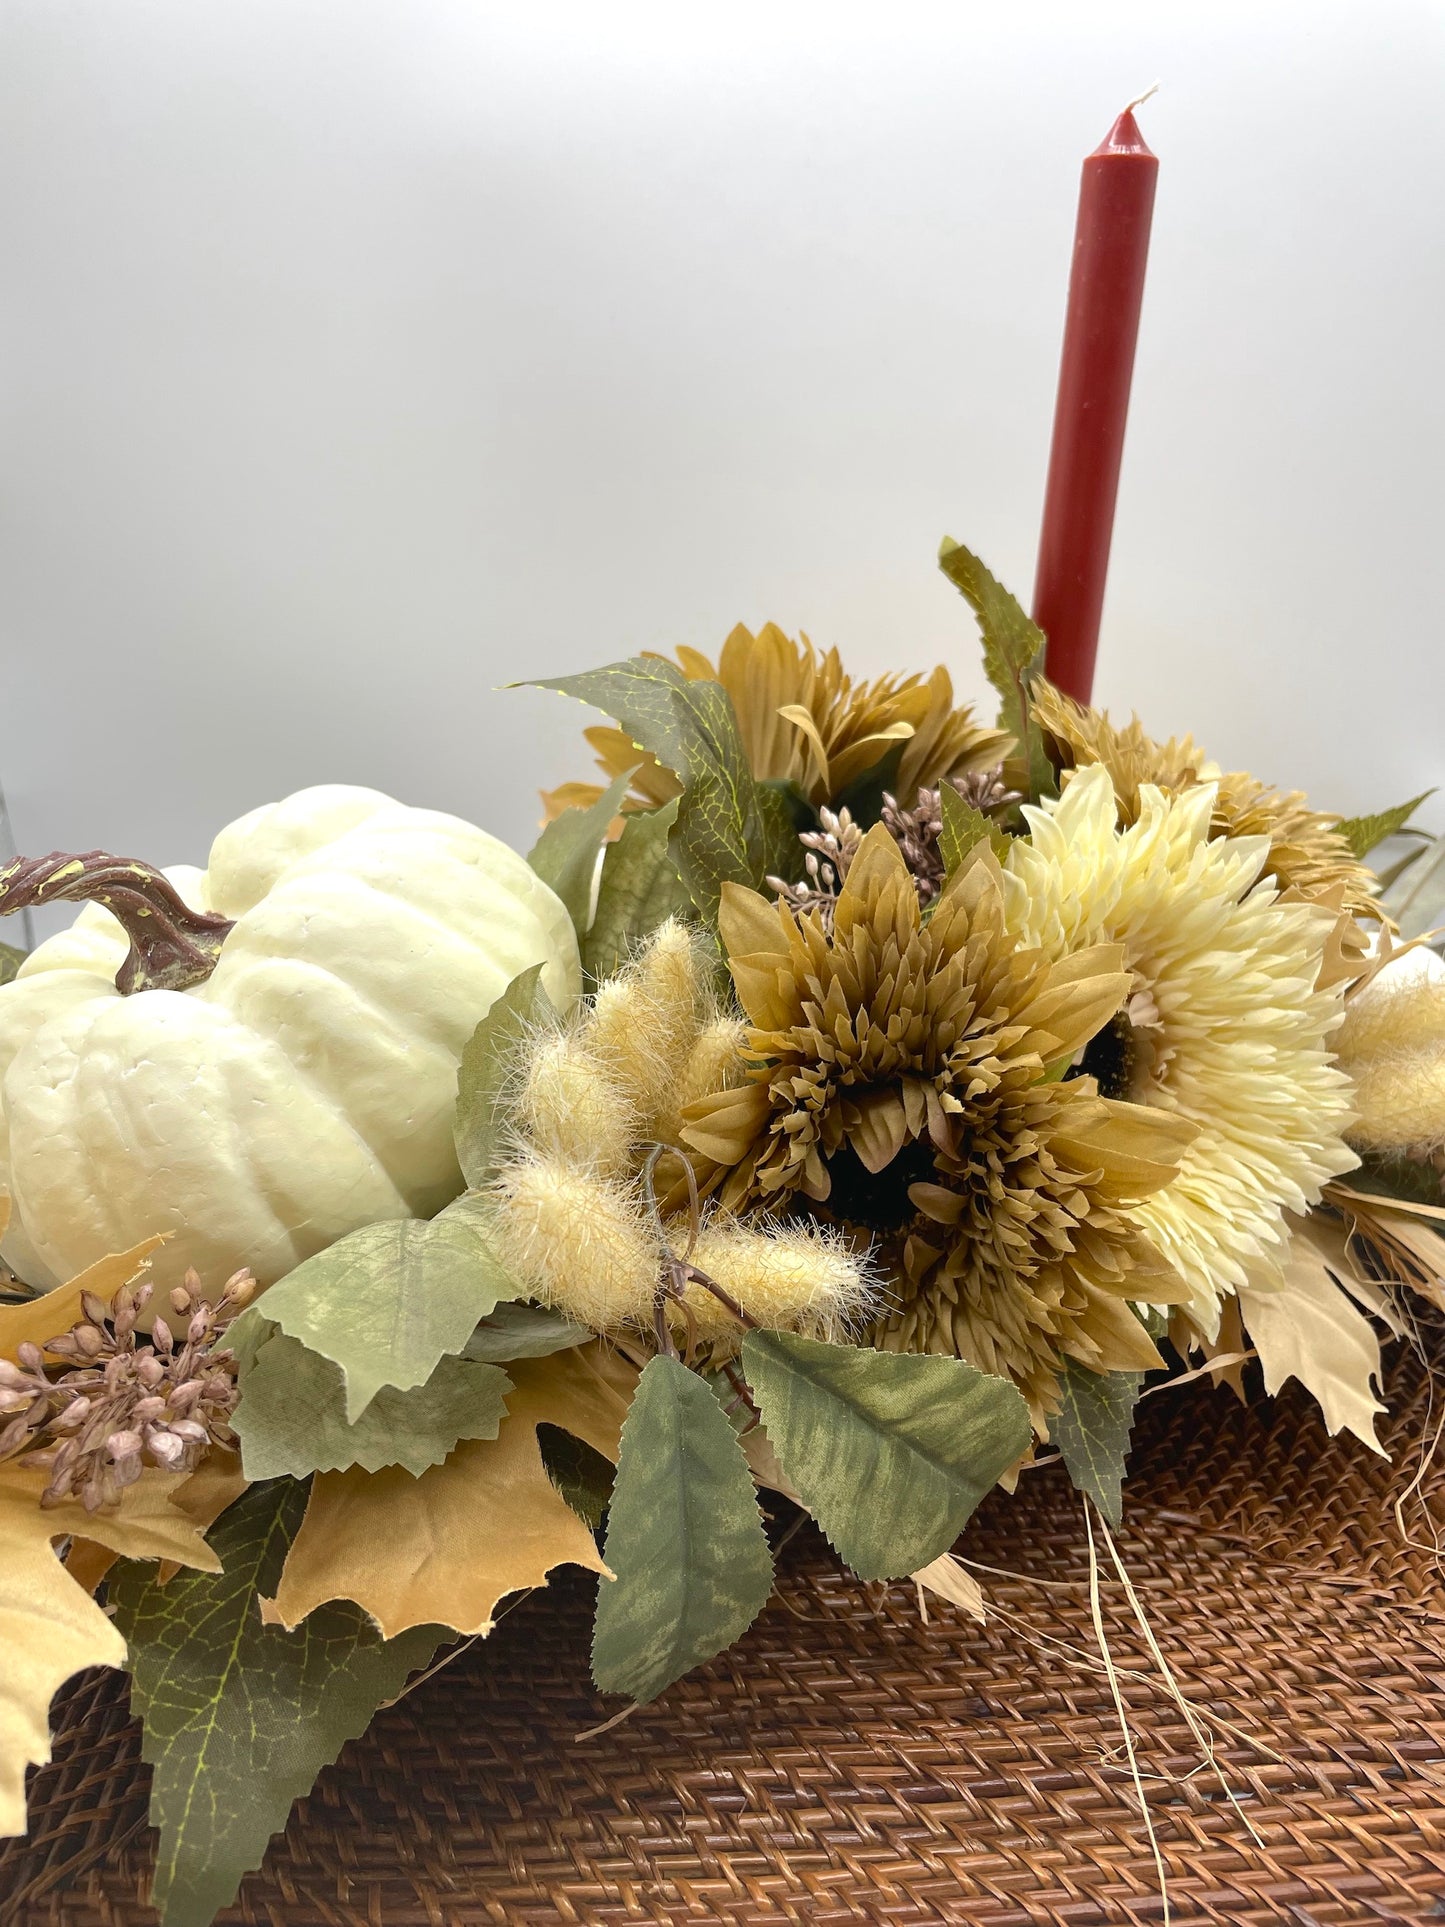 Elegant Fall Centerpiece with Candle, Thanksgiving Arrangement in Neutral Colors